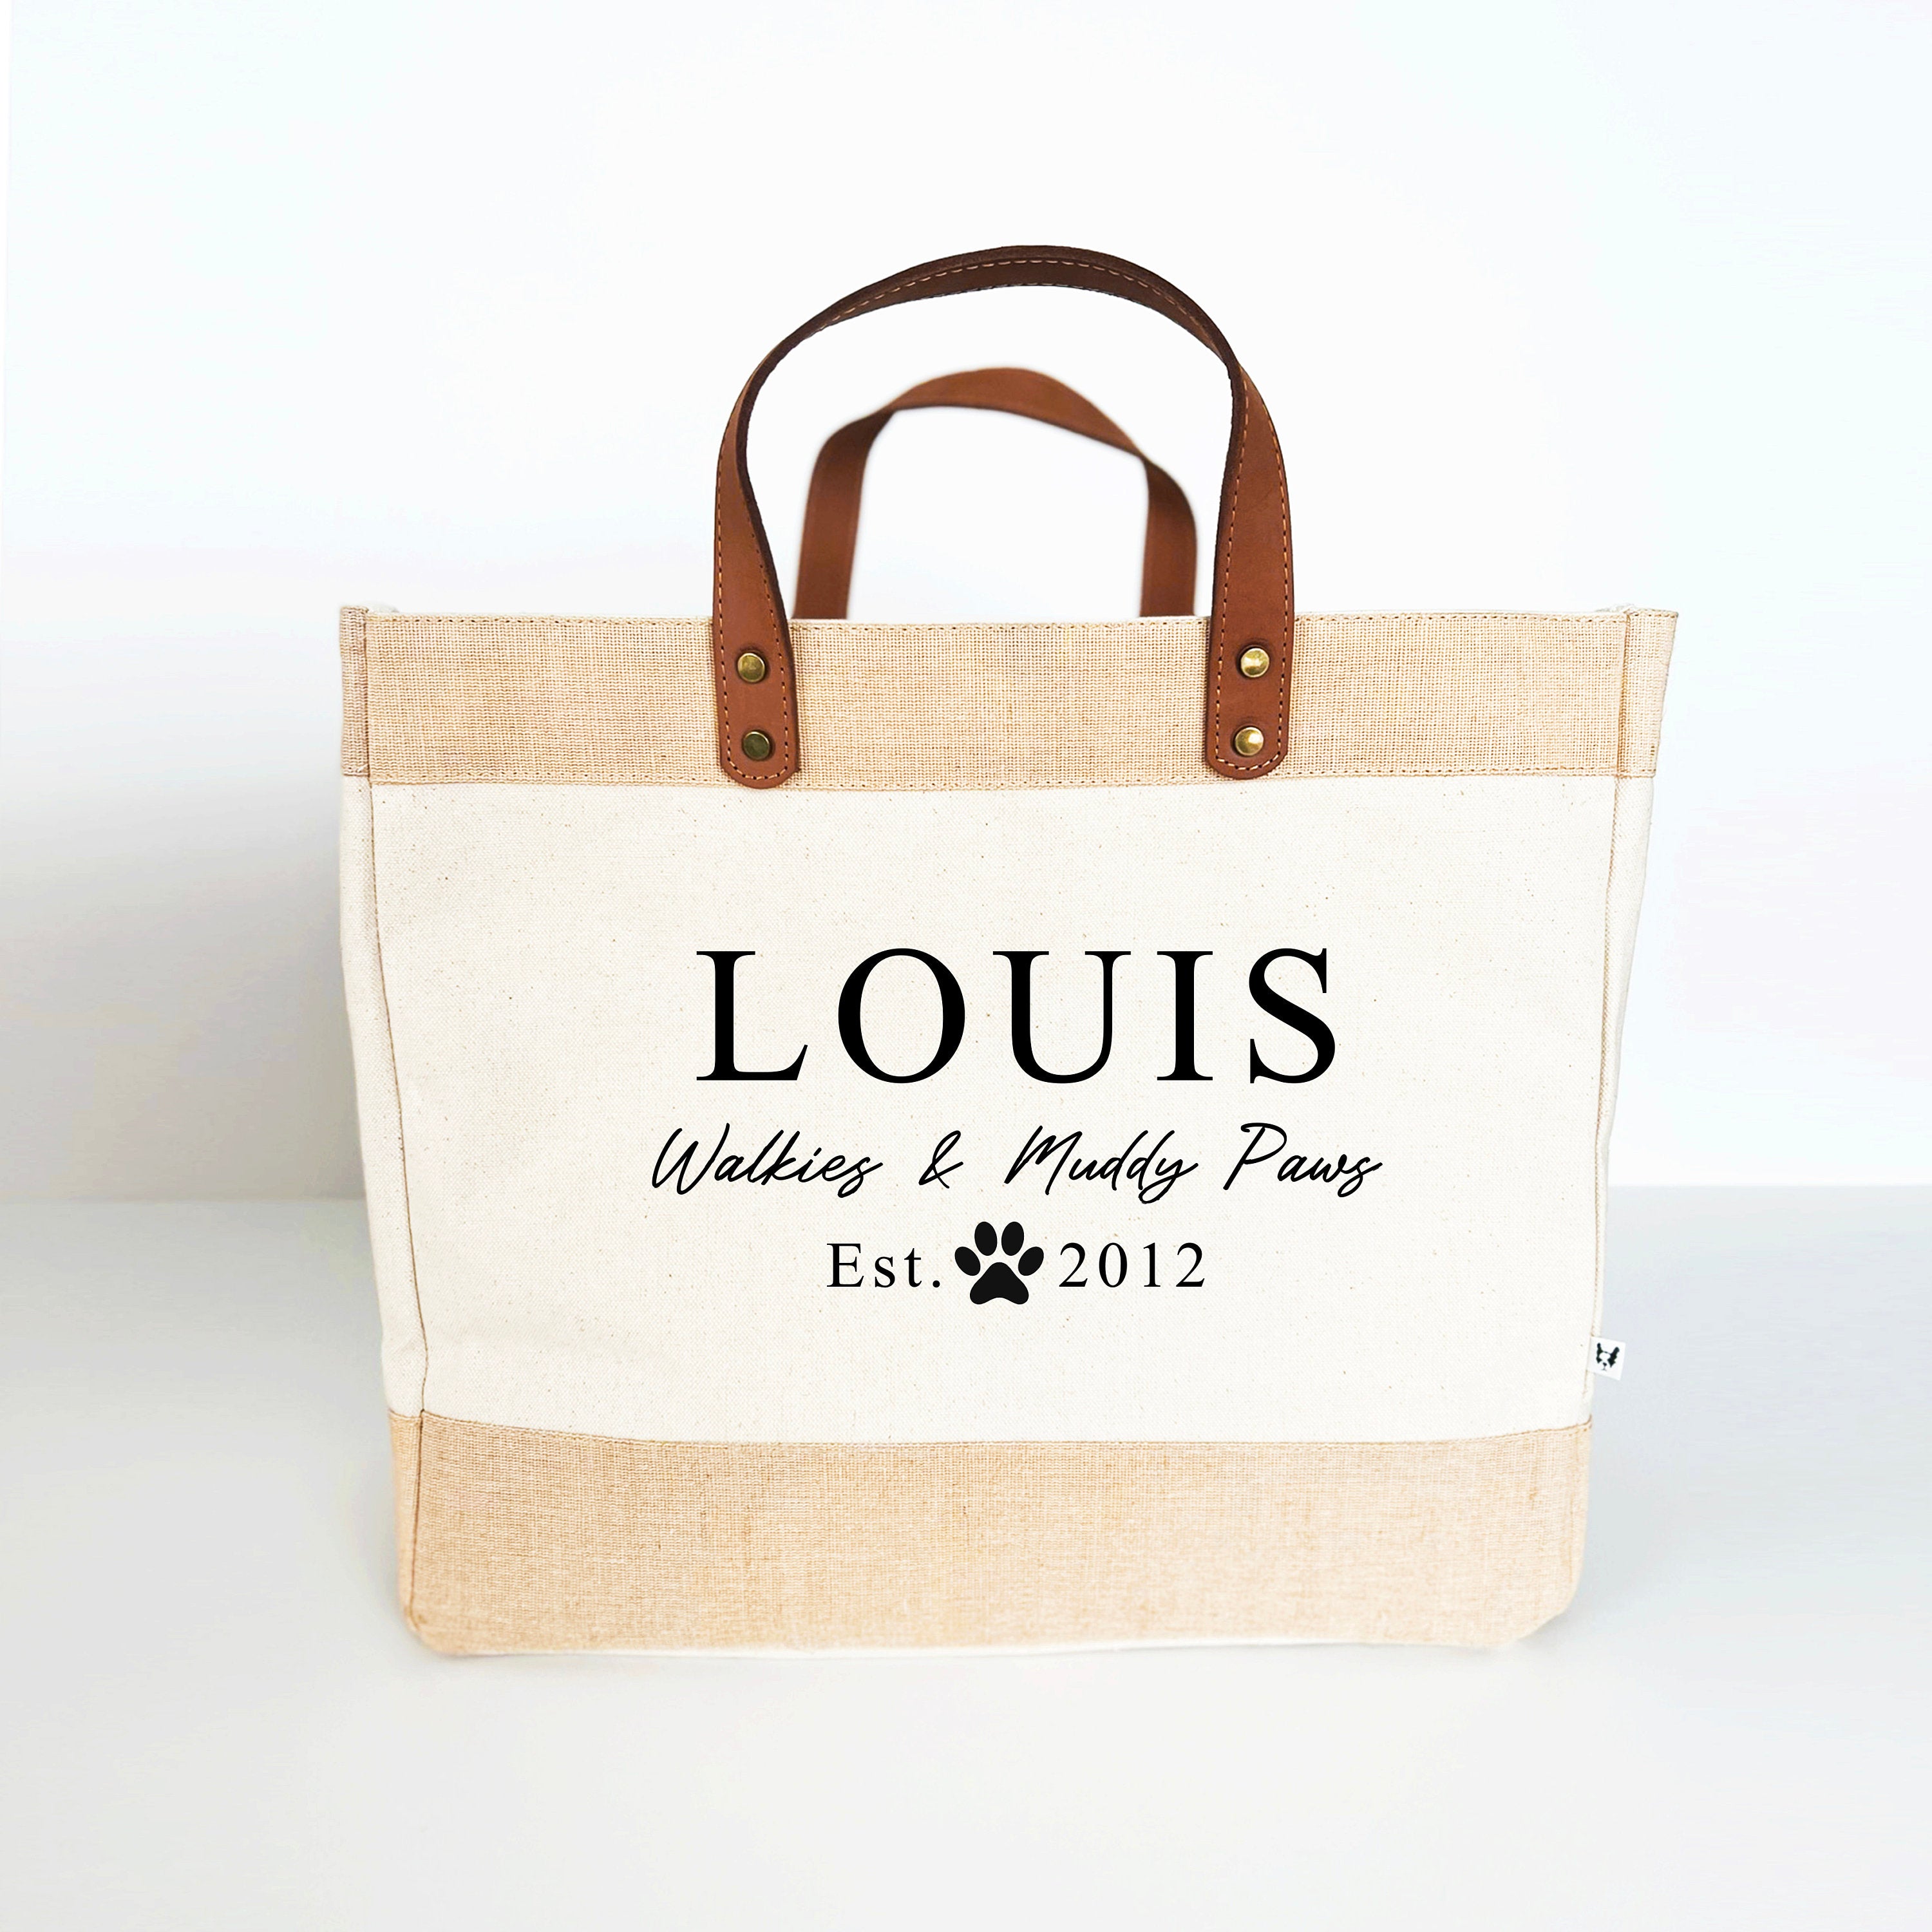 Walkies And Muddy Paws Luxury Tote Bag, Dog Walking Bag, Market Tote Bag, Canvas and Leather Shopping Bag, Gift for Dog Lovers, New Puppy